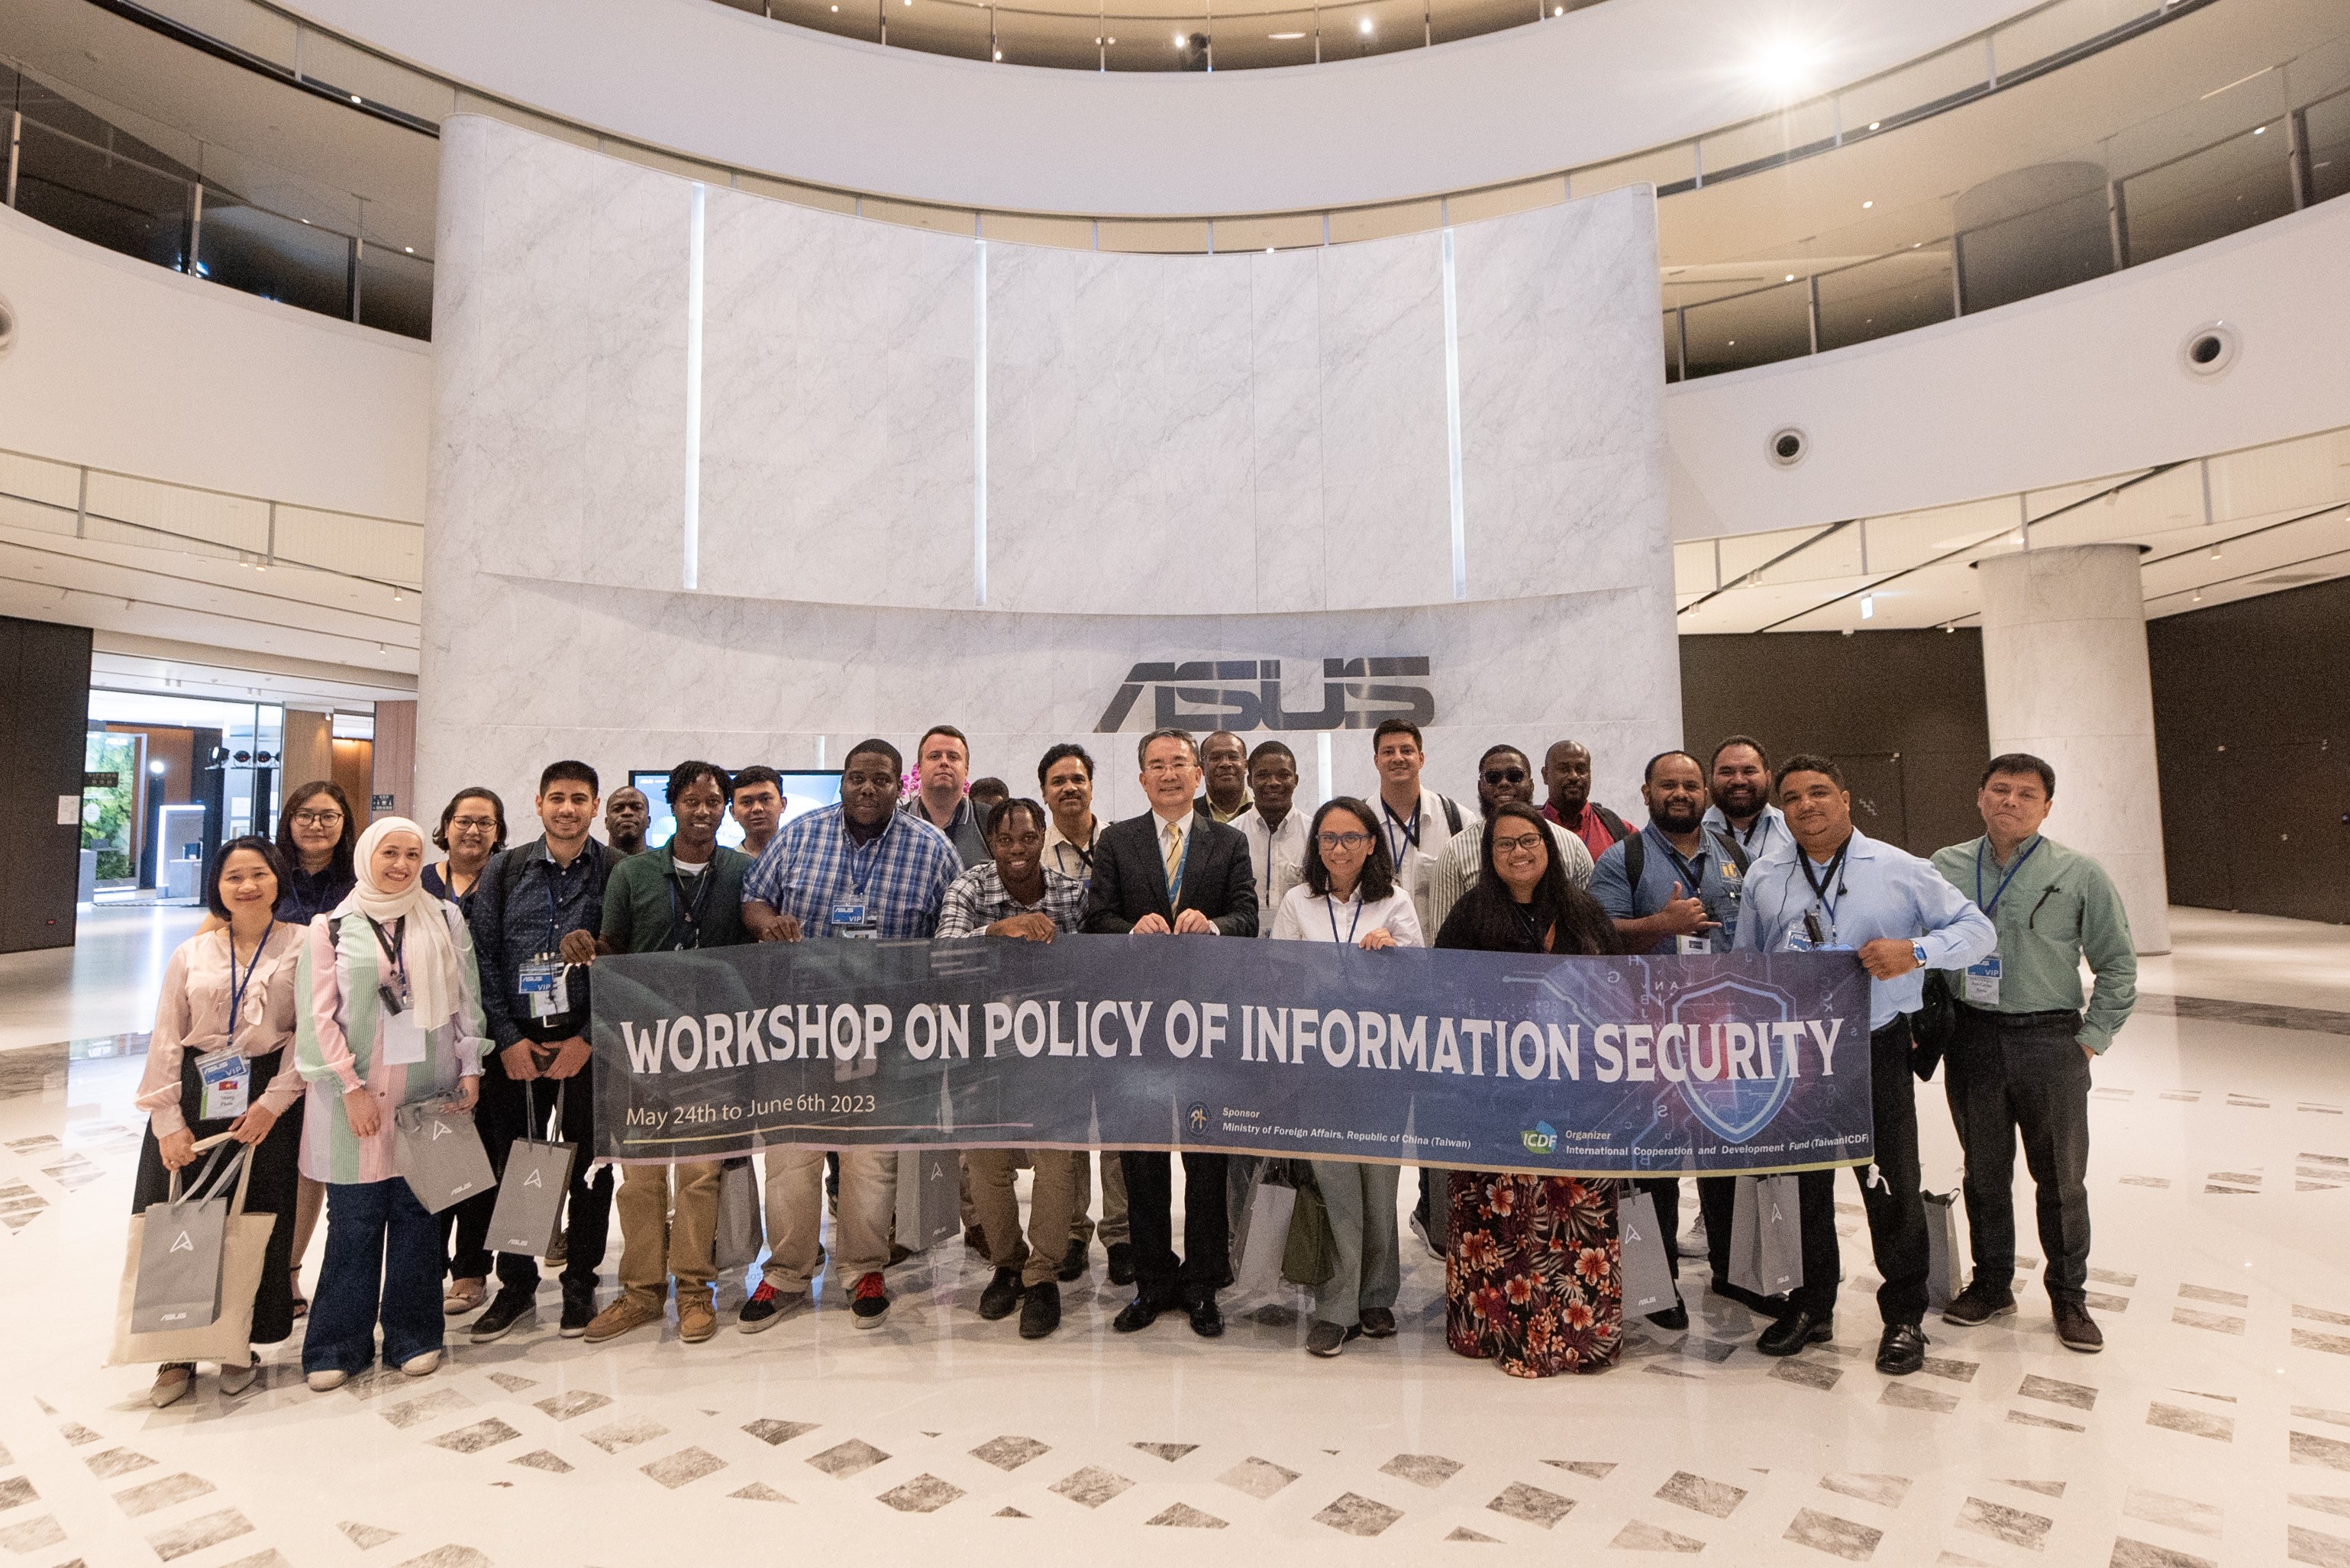 The TaiwanICDF Organized the Workshop on Policy of Information Security to Improve Regional Cybersecurity